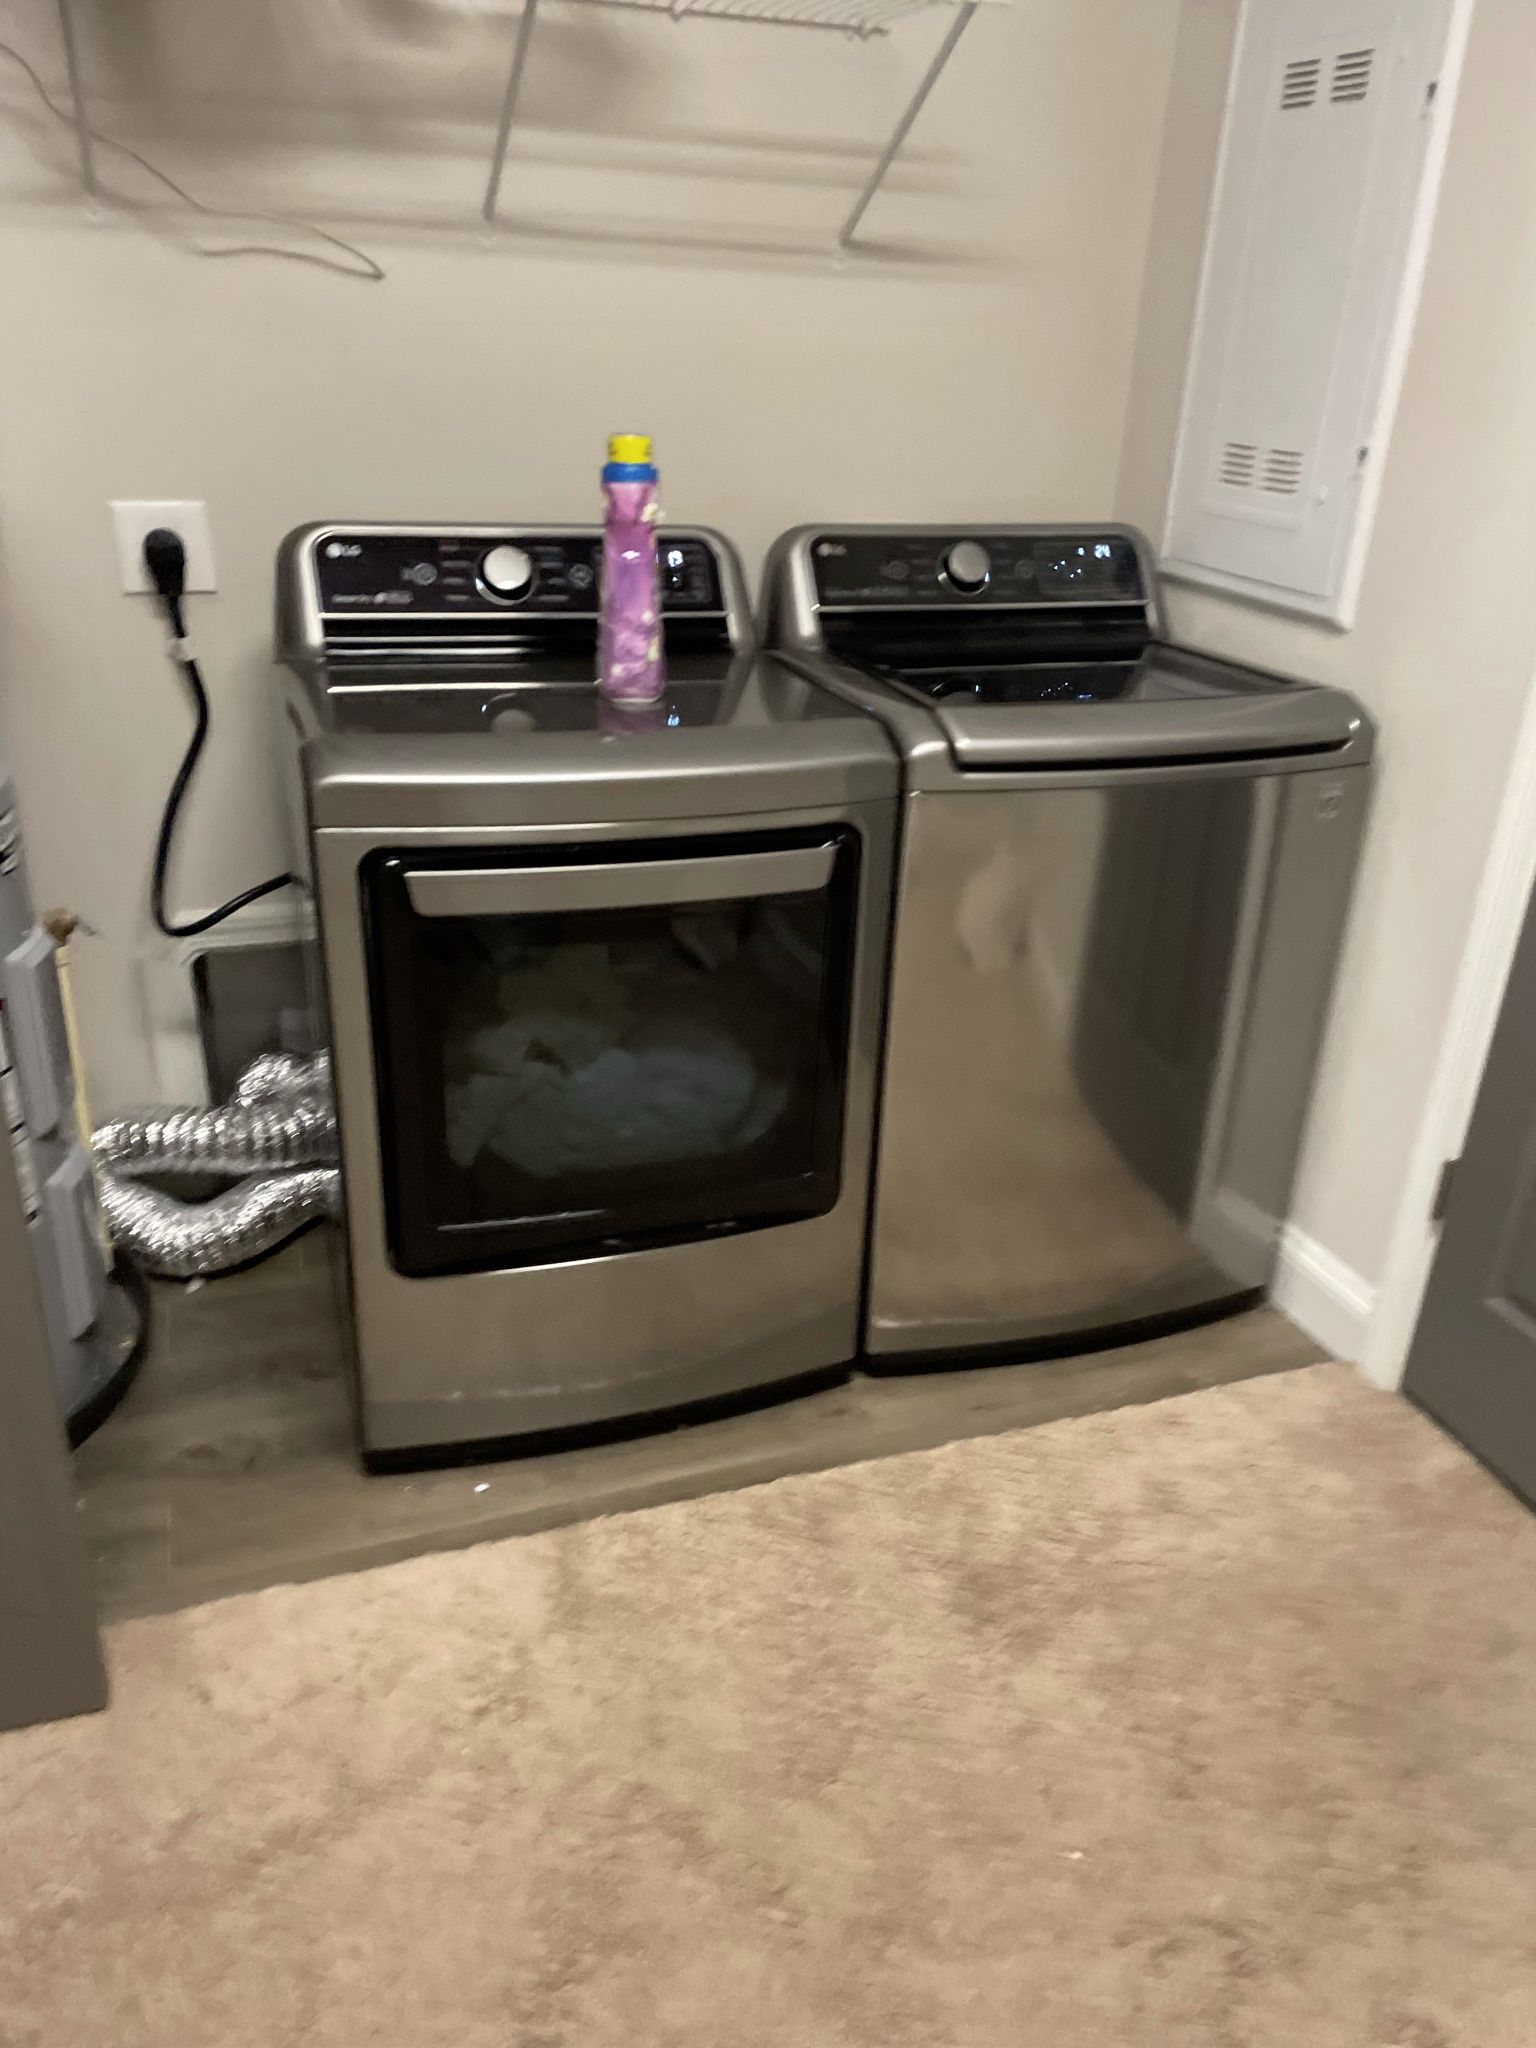 Samsung LG Smart Washer And Dryer.